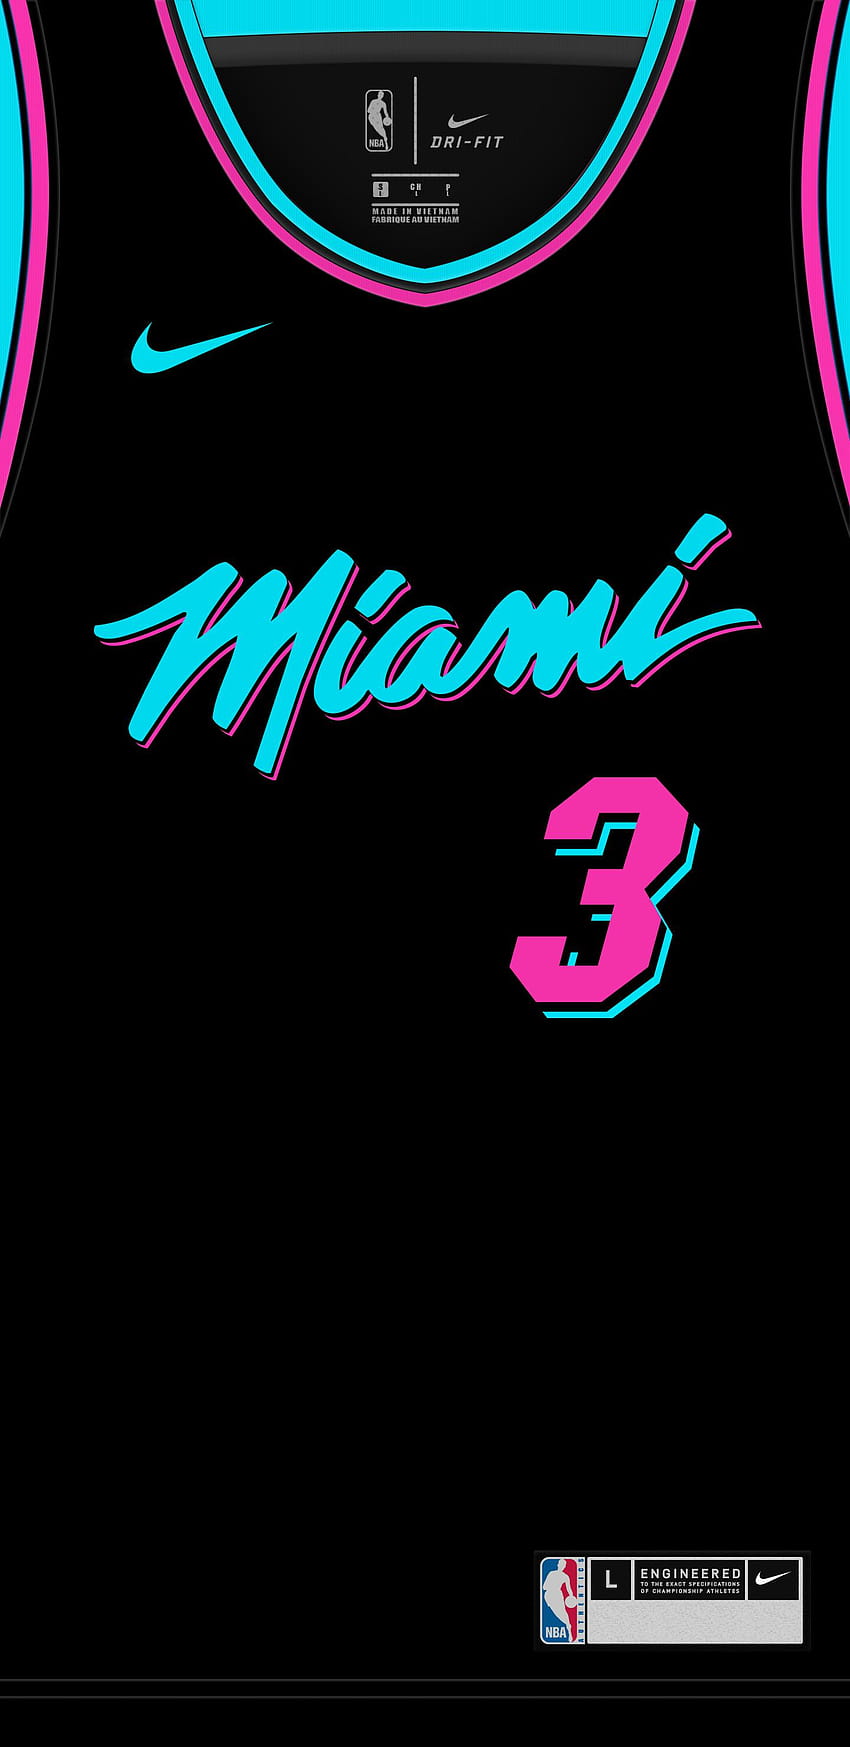 The Heat, miami vice android HD phone wallpaper